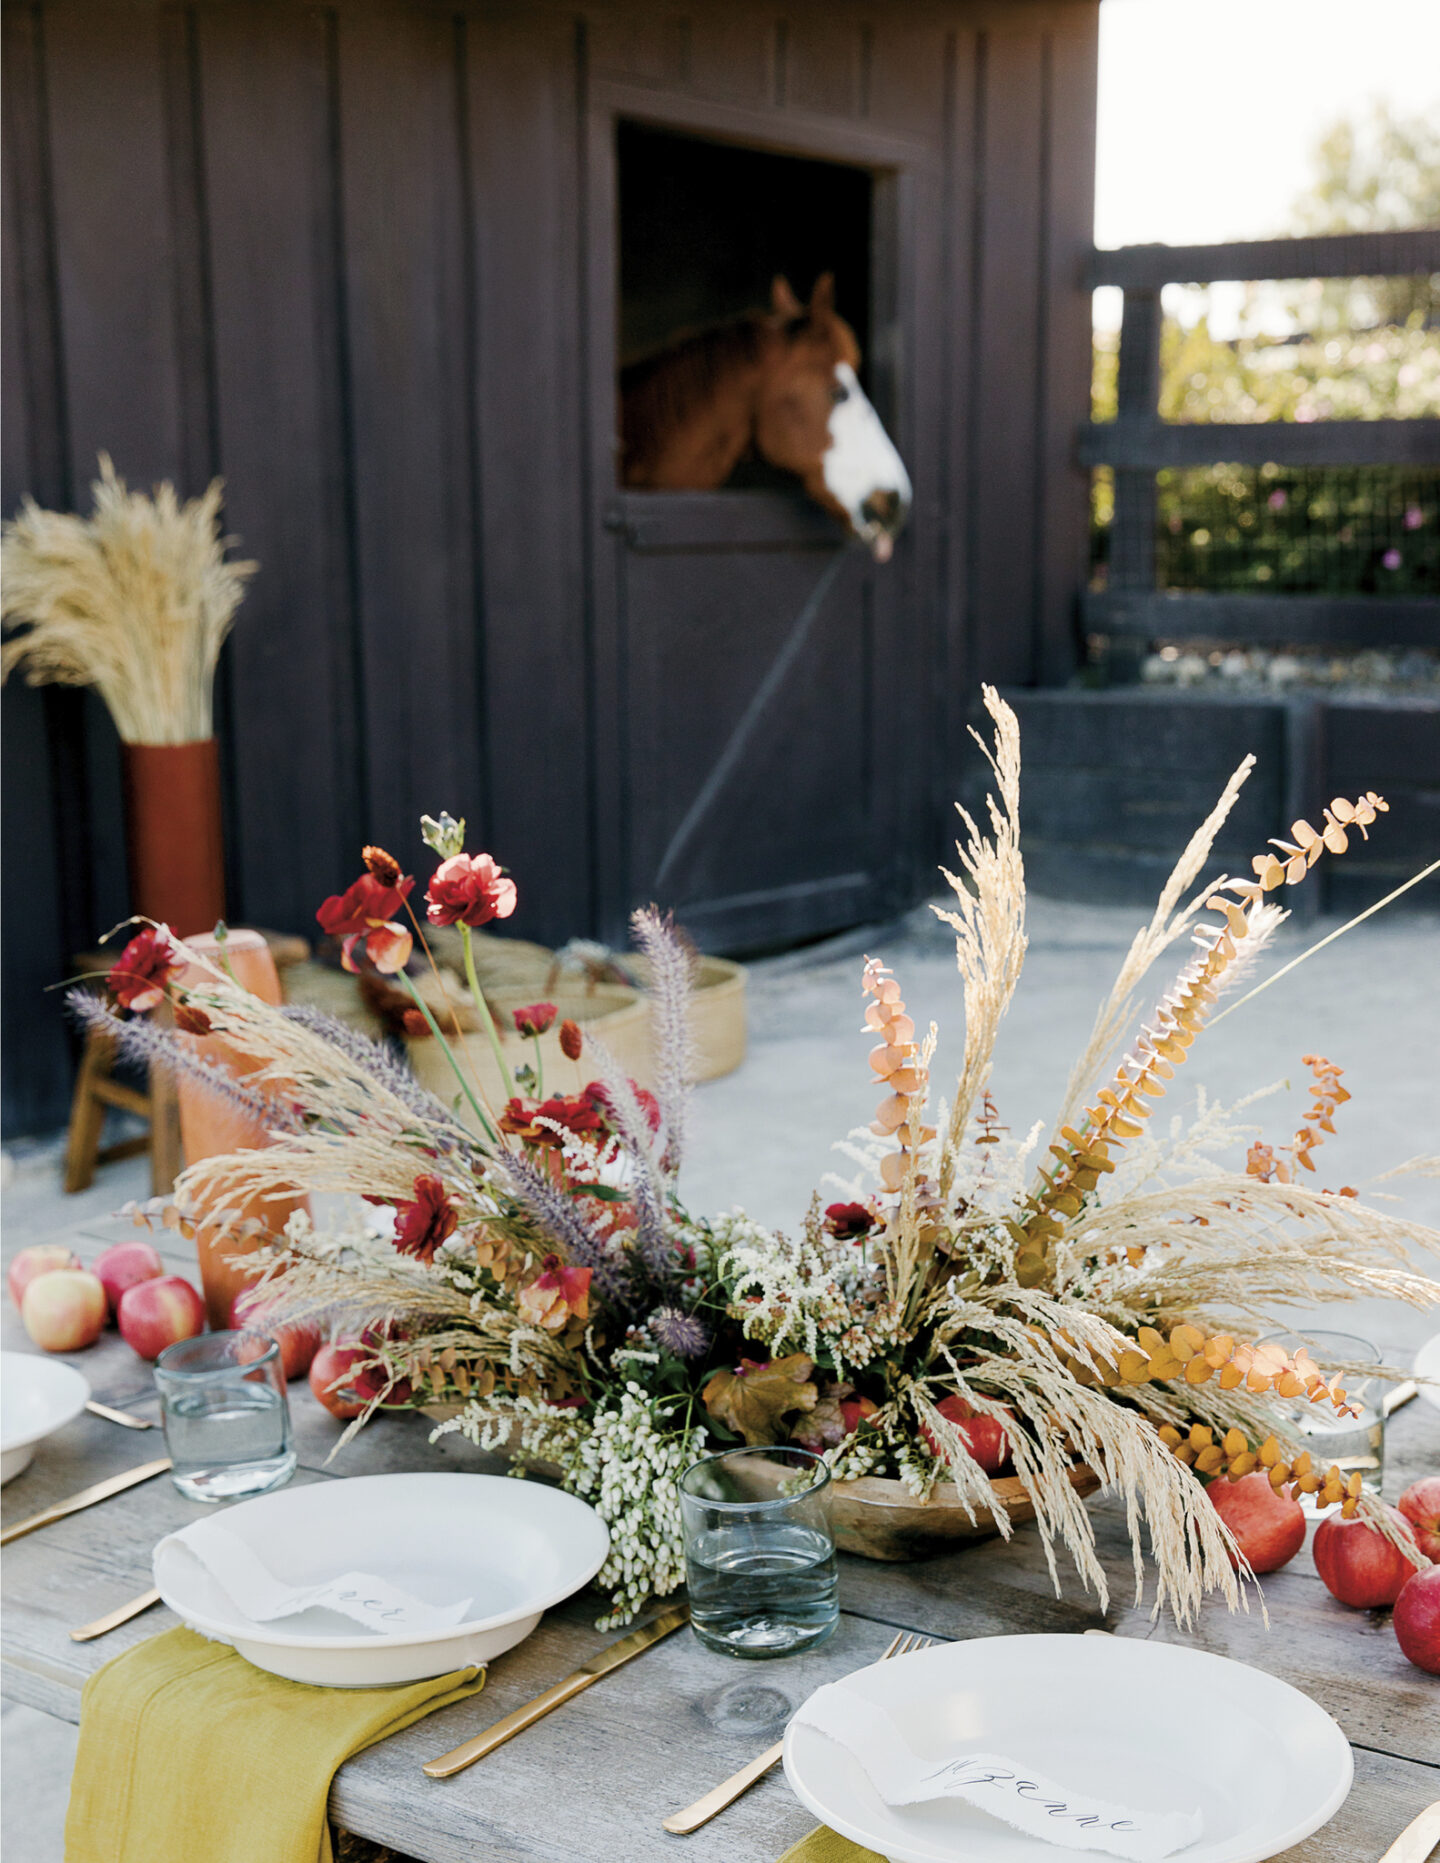 Earthy organic outdoor tablescape near stable - Jenni Kayne for PACIFIC NATURAL.